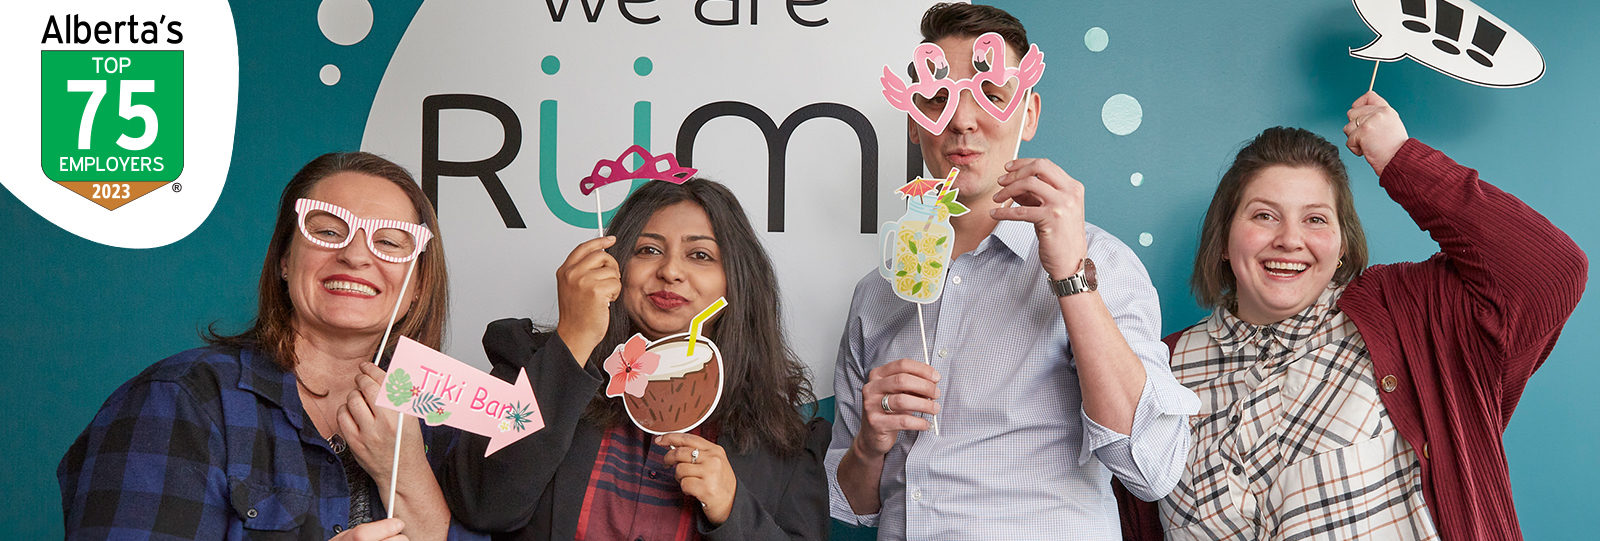 Four Rümi employees smile with party decorations in front of a wall that says "We are Rümi". A logo shows that Rümi is one of Alberta's Top 75 Employers. 